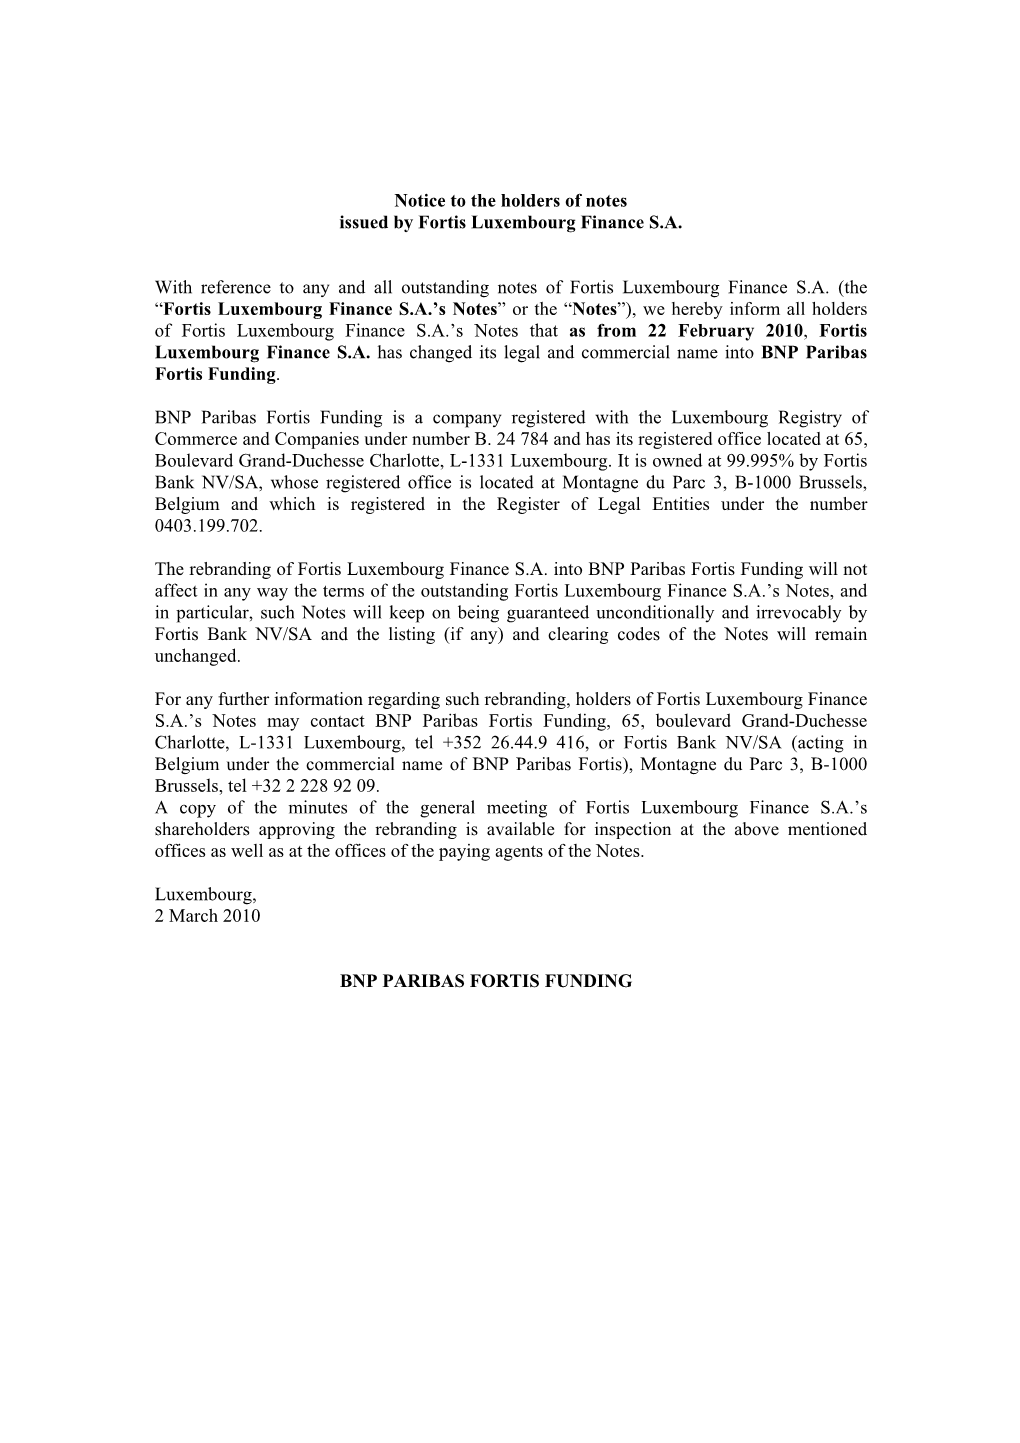 Notice to the Holders of Notes Issued by Fortis Luxembourg Finance S.A